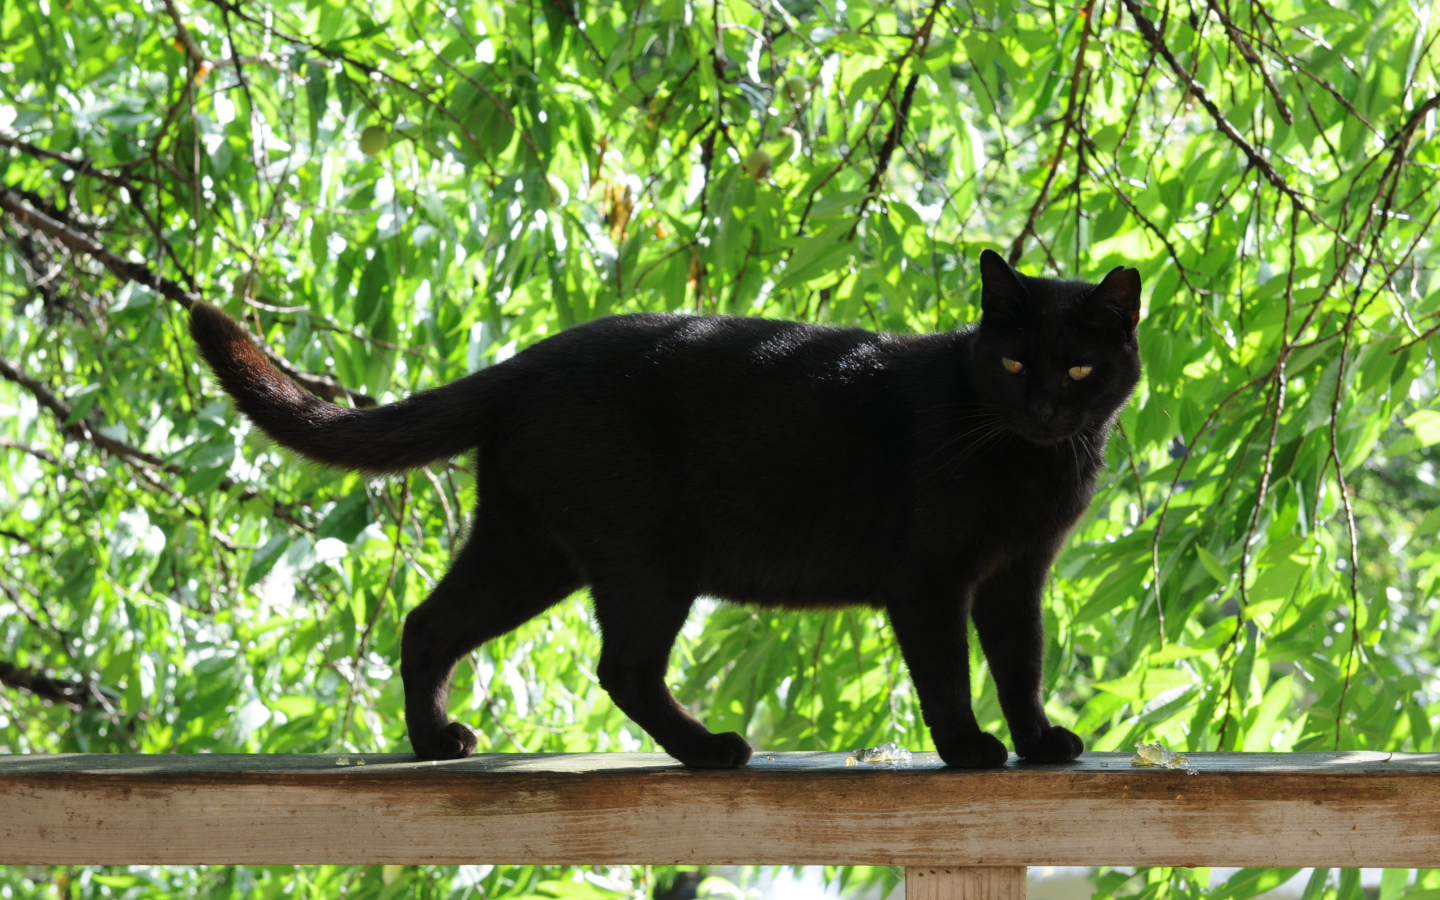  Black cat on a fence under the tree